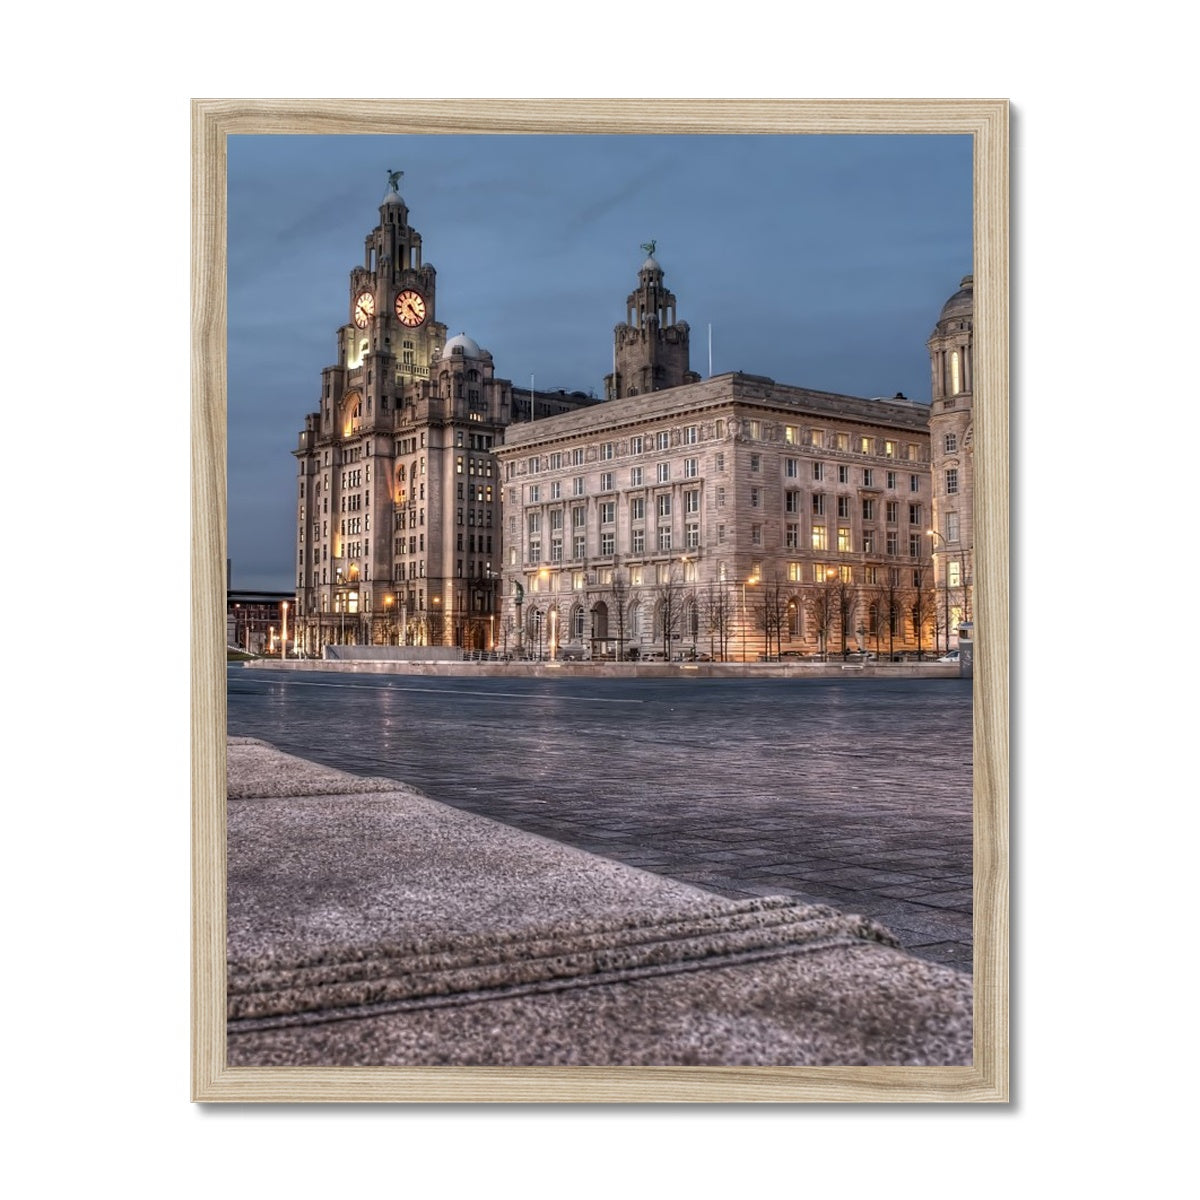 The Liver Buildings: A Liverpool Icon at Twilight Budget Framed Poster